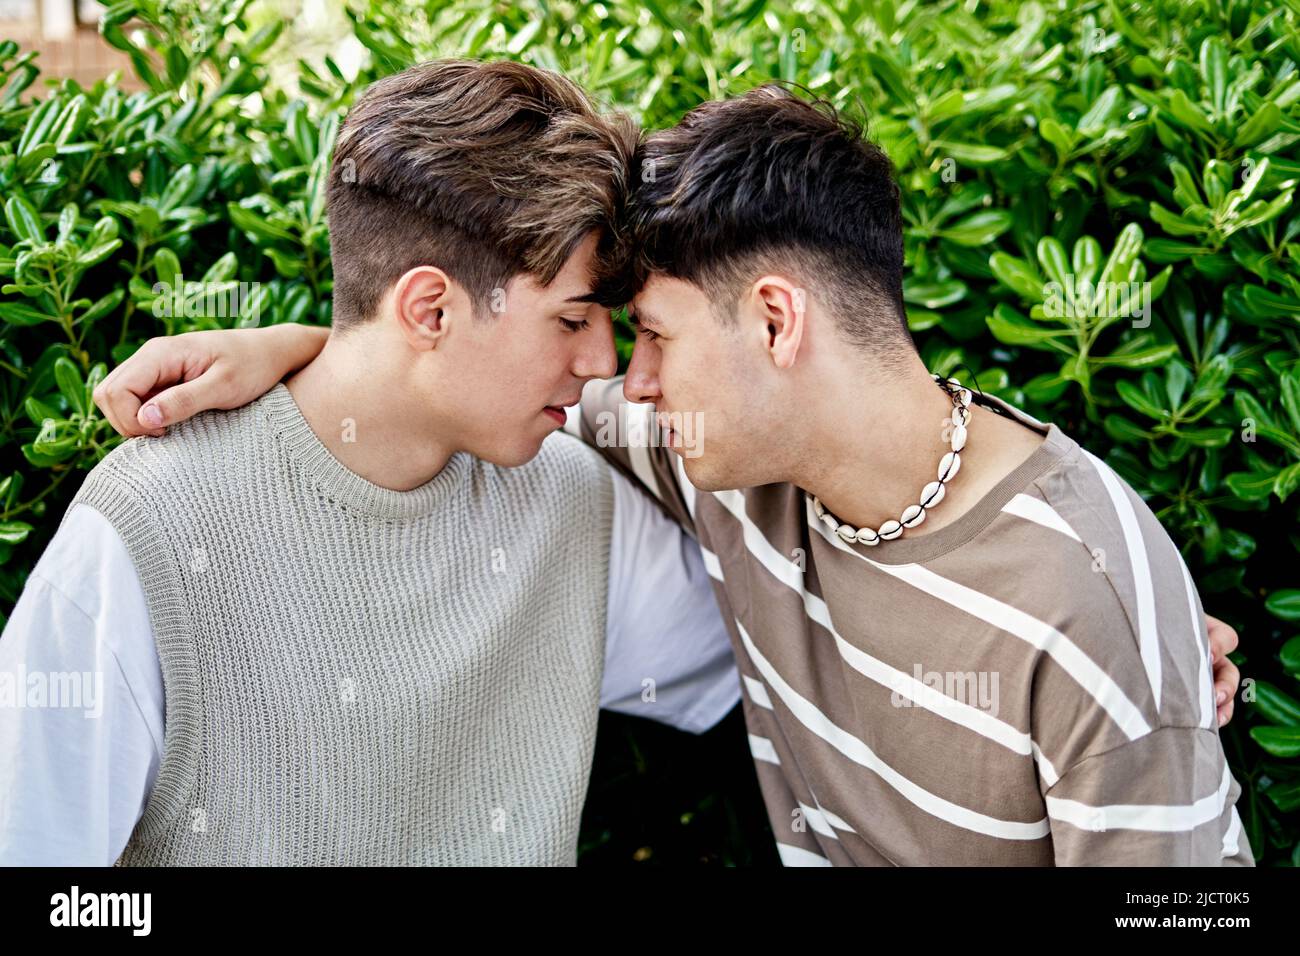 Moment Of Intimacy Of A Gay Couple Stock Photo